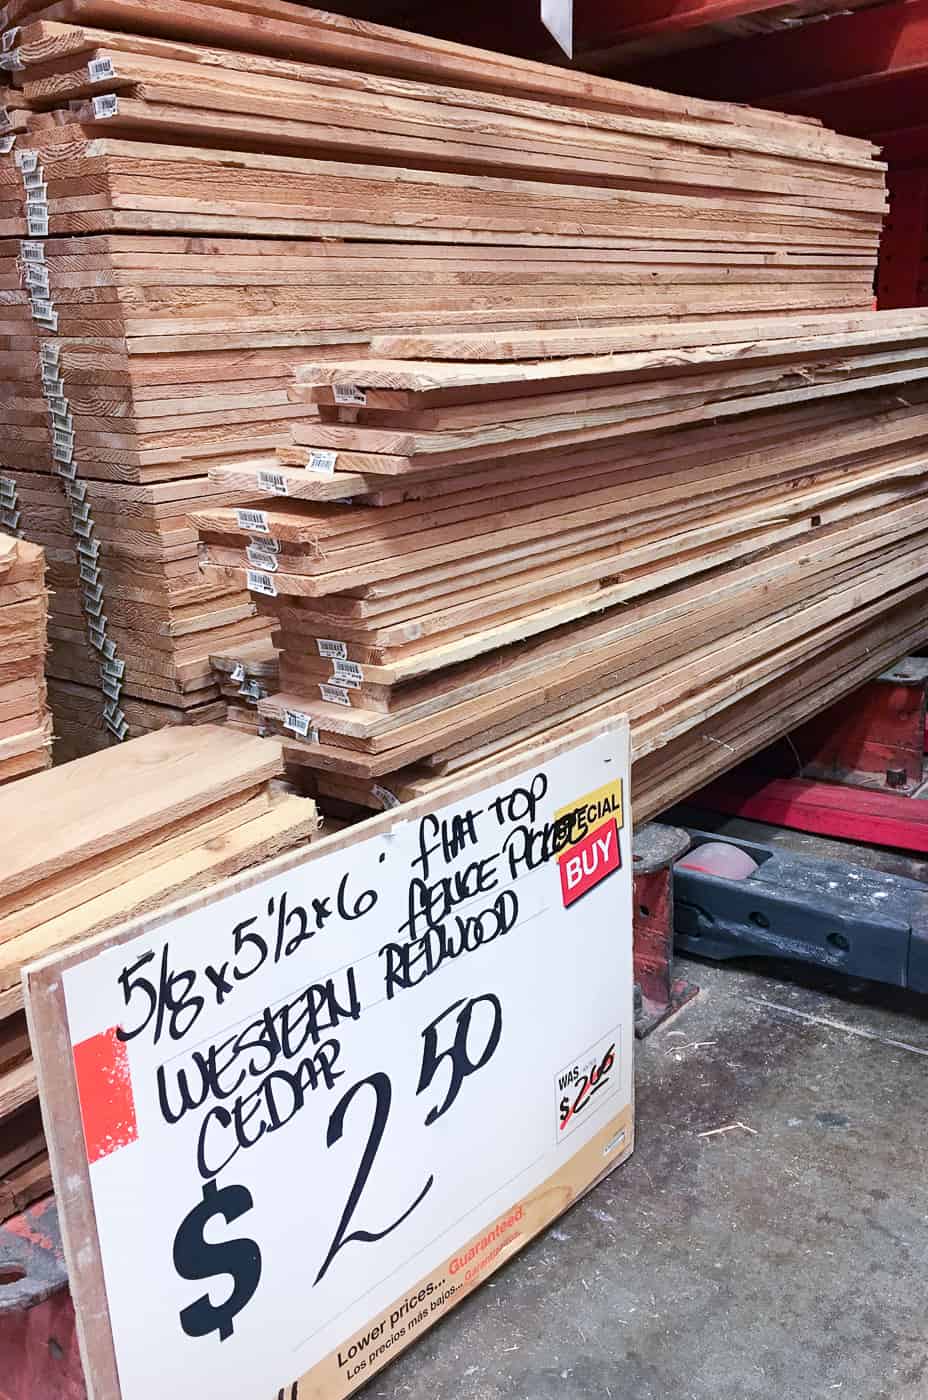 cedar fence pickets in a pile at Home Depot with price sign